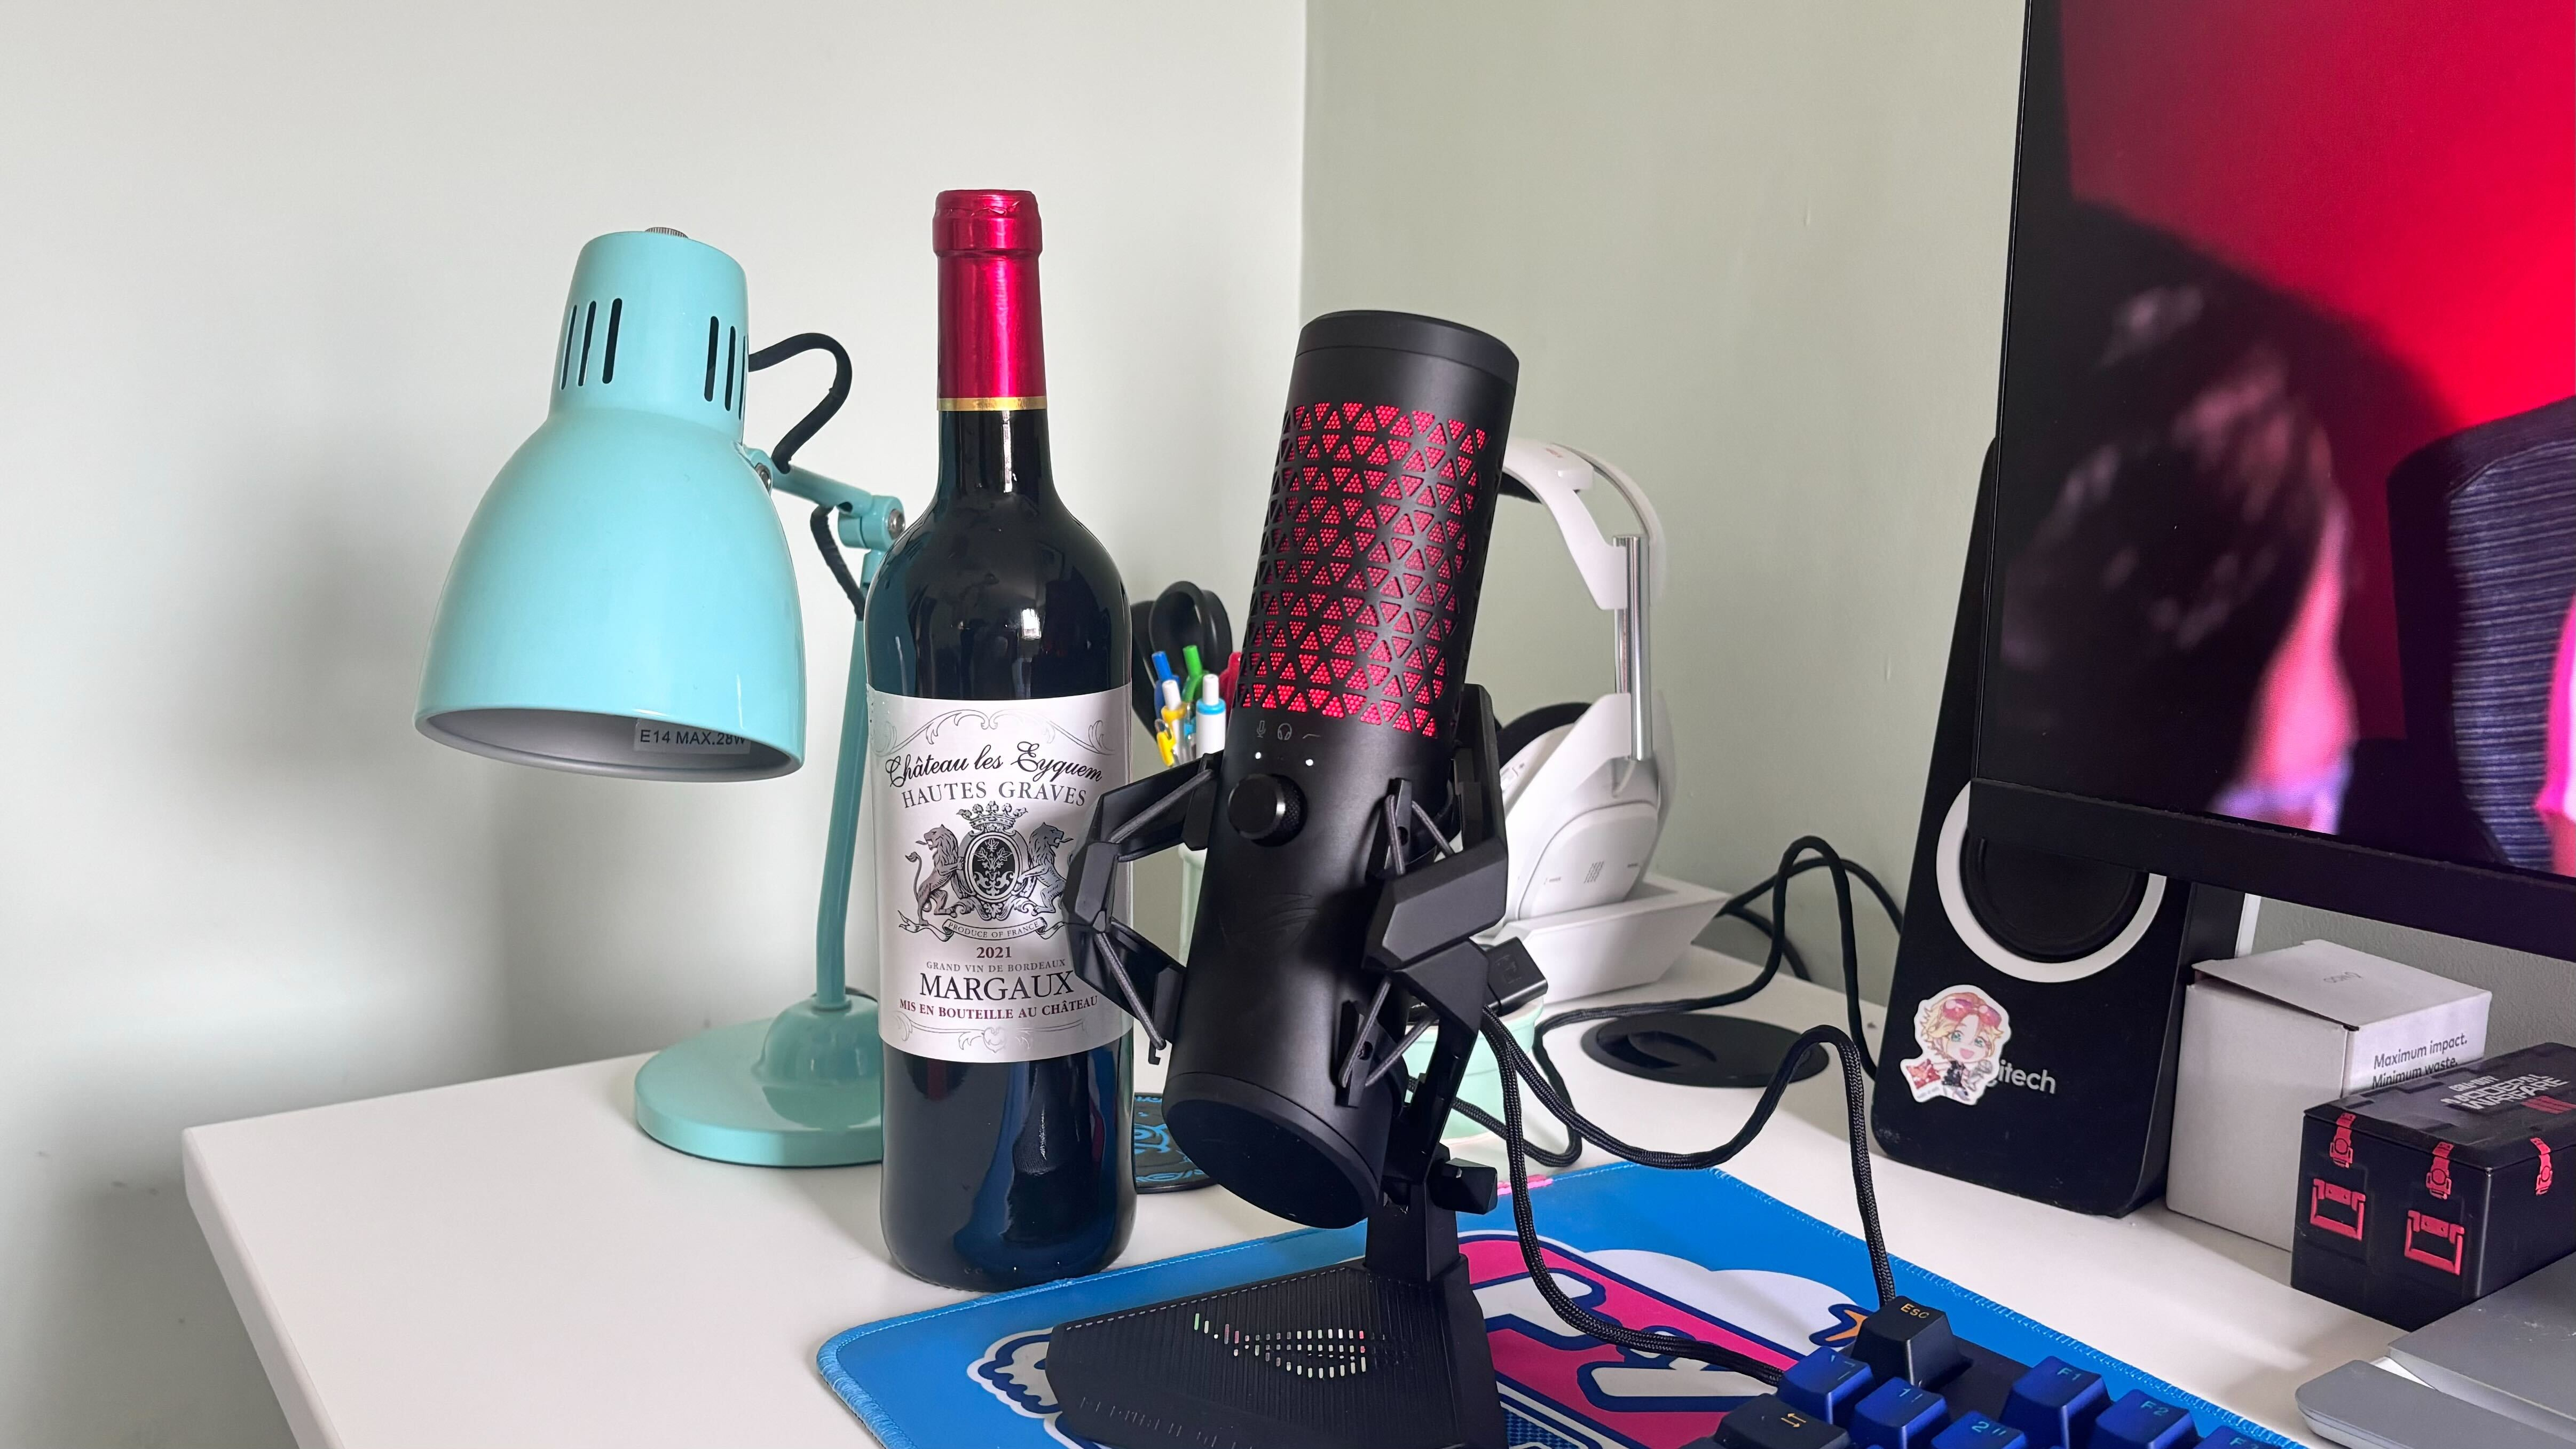 A photo showing the size of the Asus ROG Carnyx relative to a wine bottle.